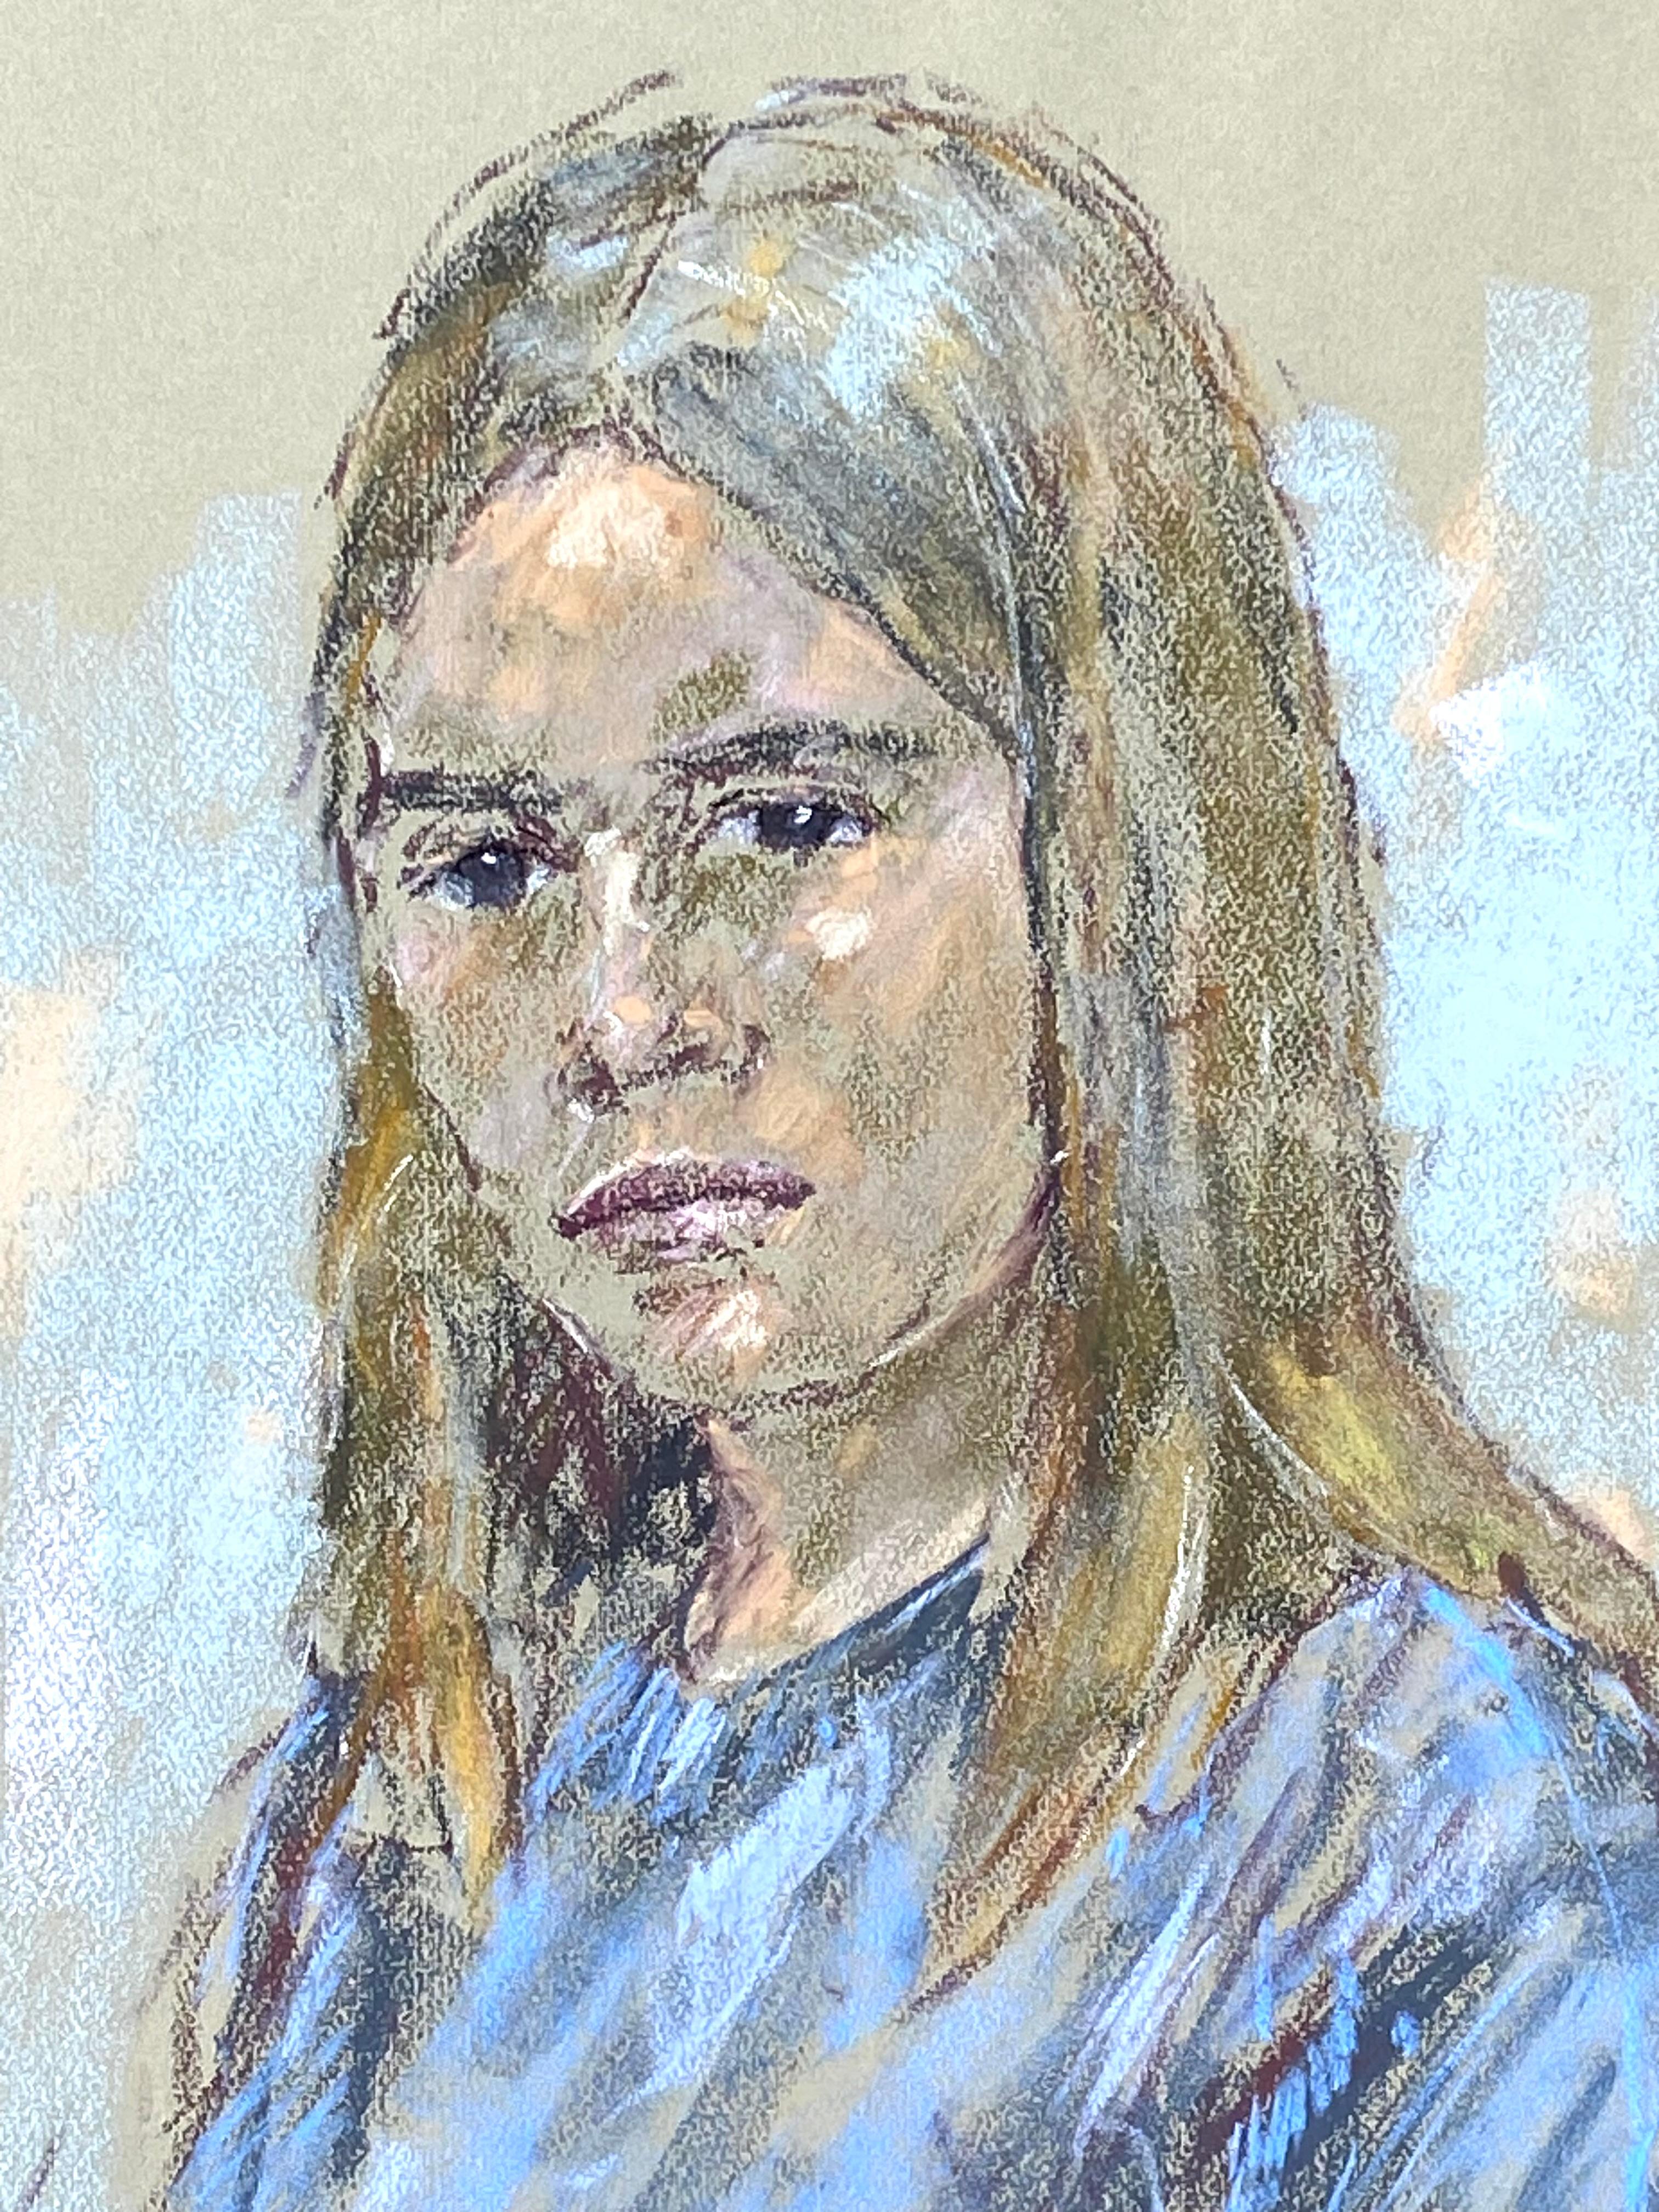 Original oil pastel on archival paper of a young girl in a blue blouse.  Signed lower right and dated 1971.  Condition is very good; no issues. Anton Sipos was living in the United States when this portrait was executed.  The pastel portrait is